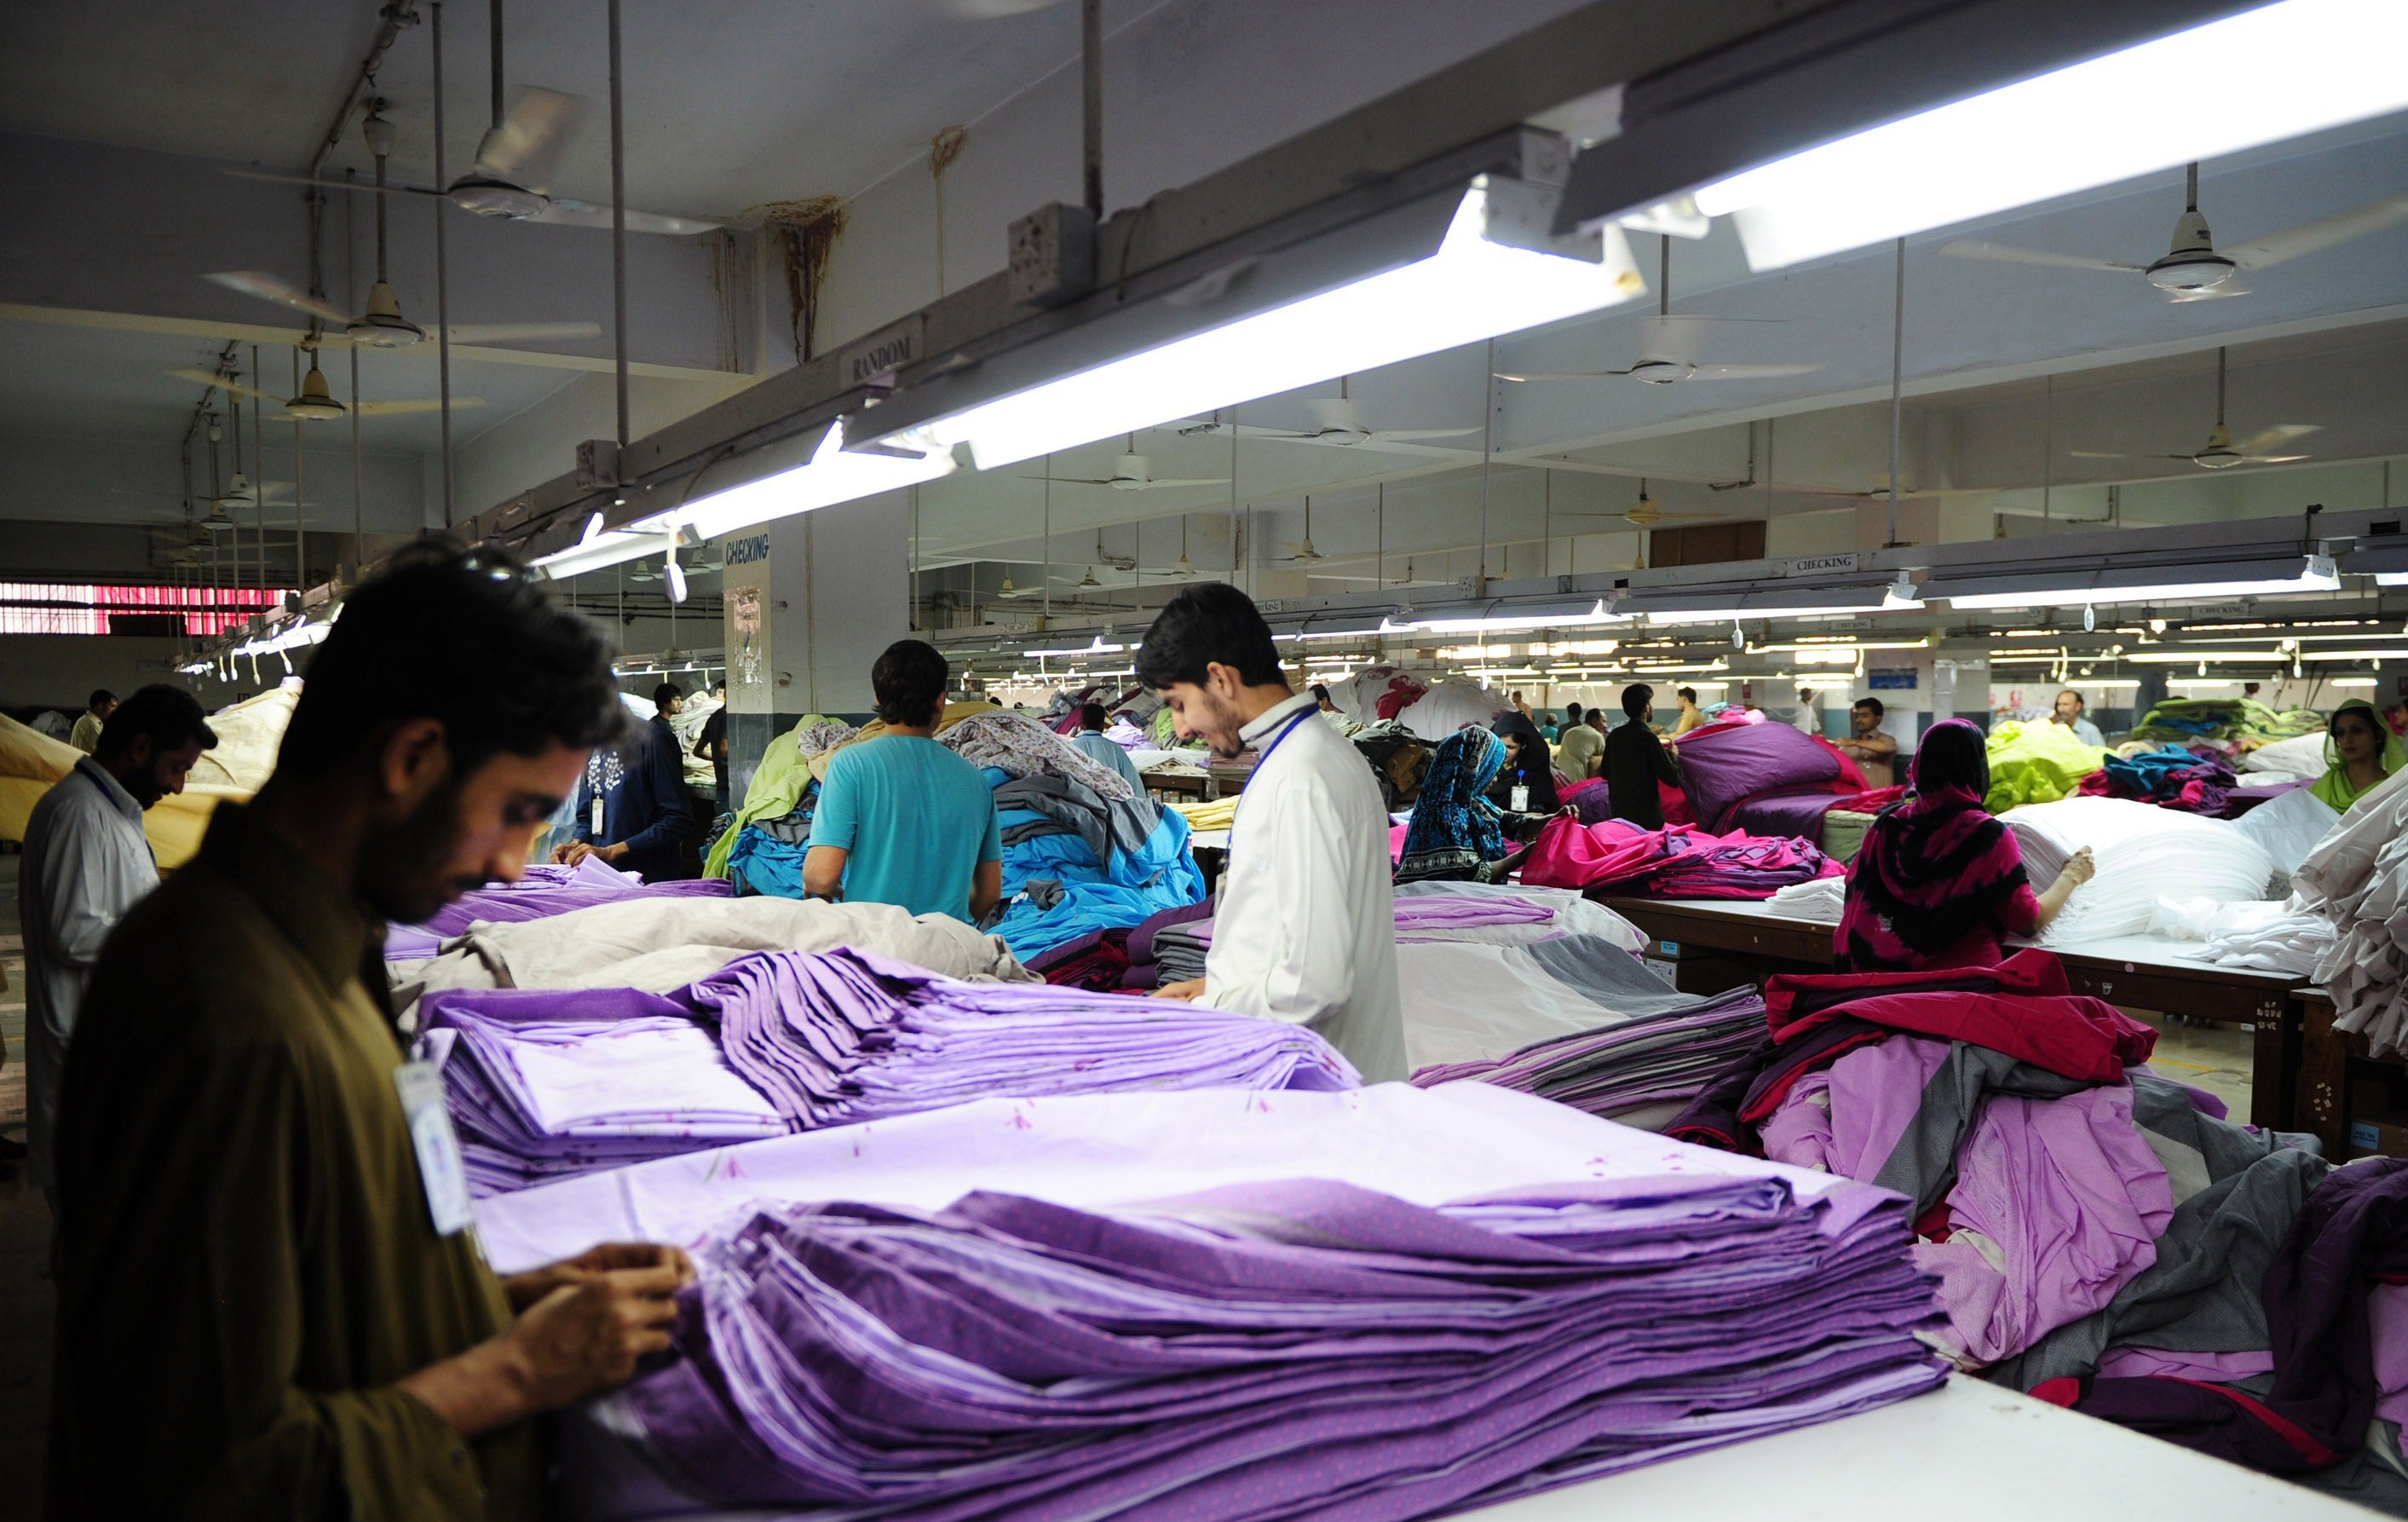 Workers in a Pakistani garment factory.